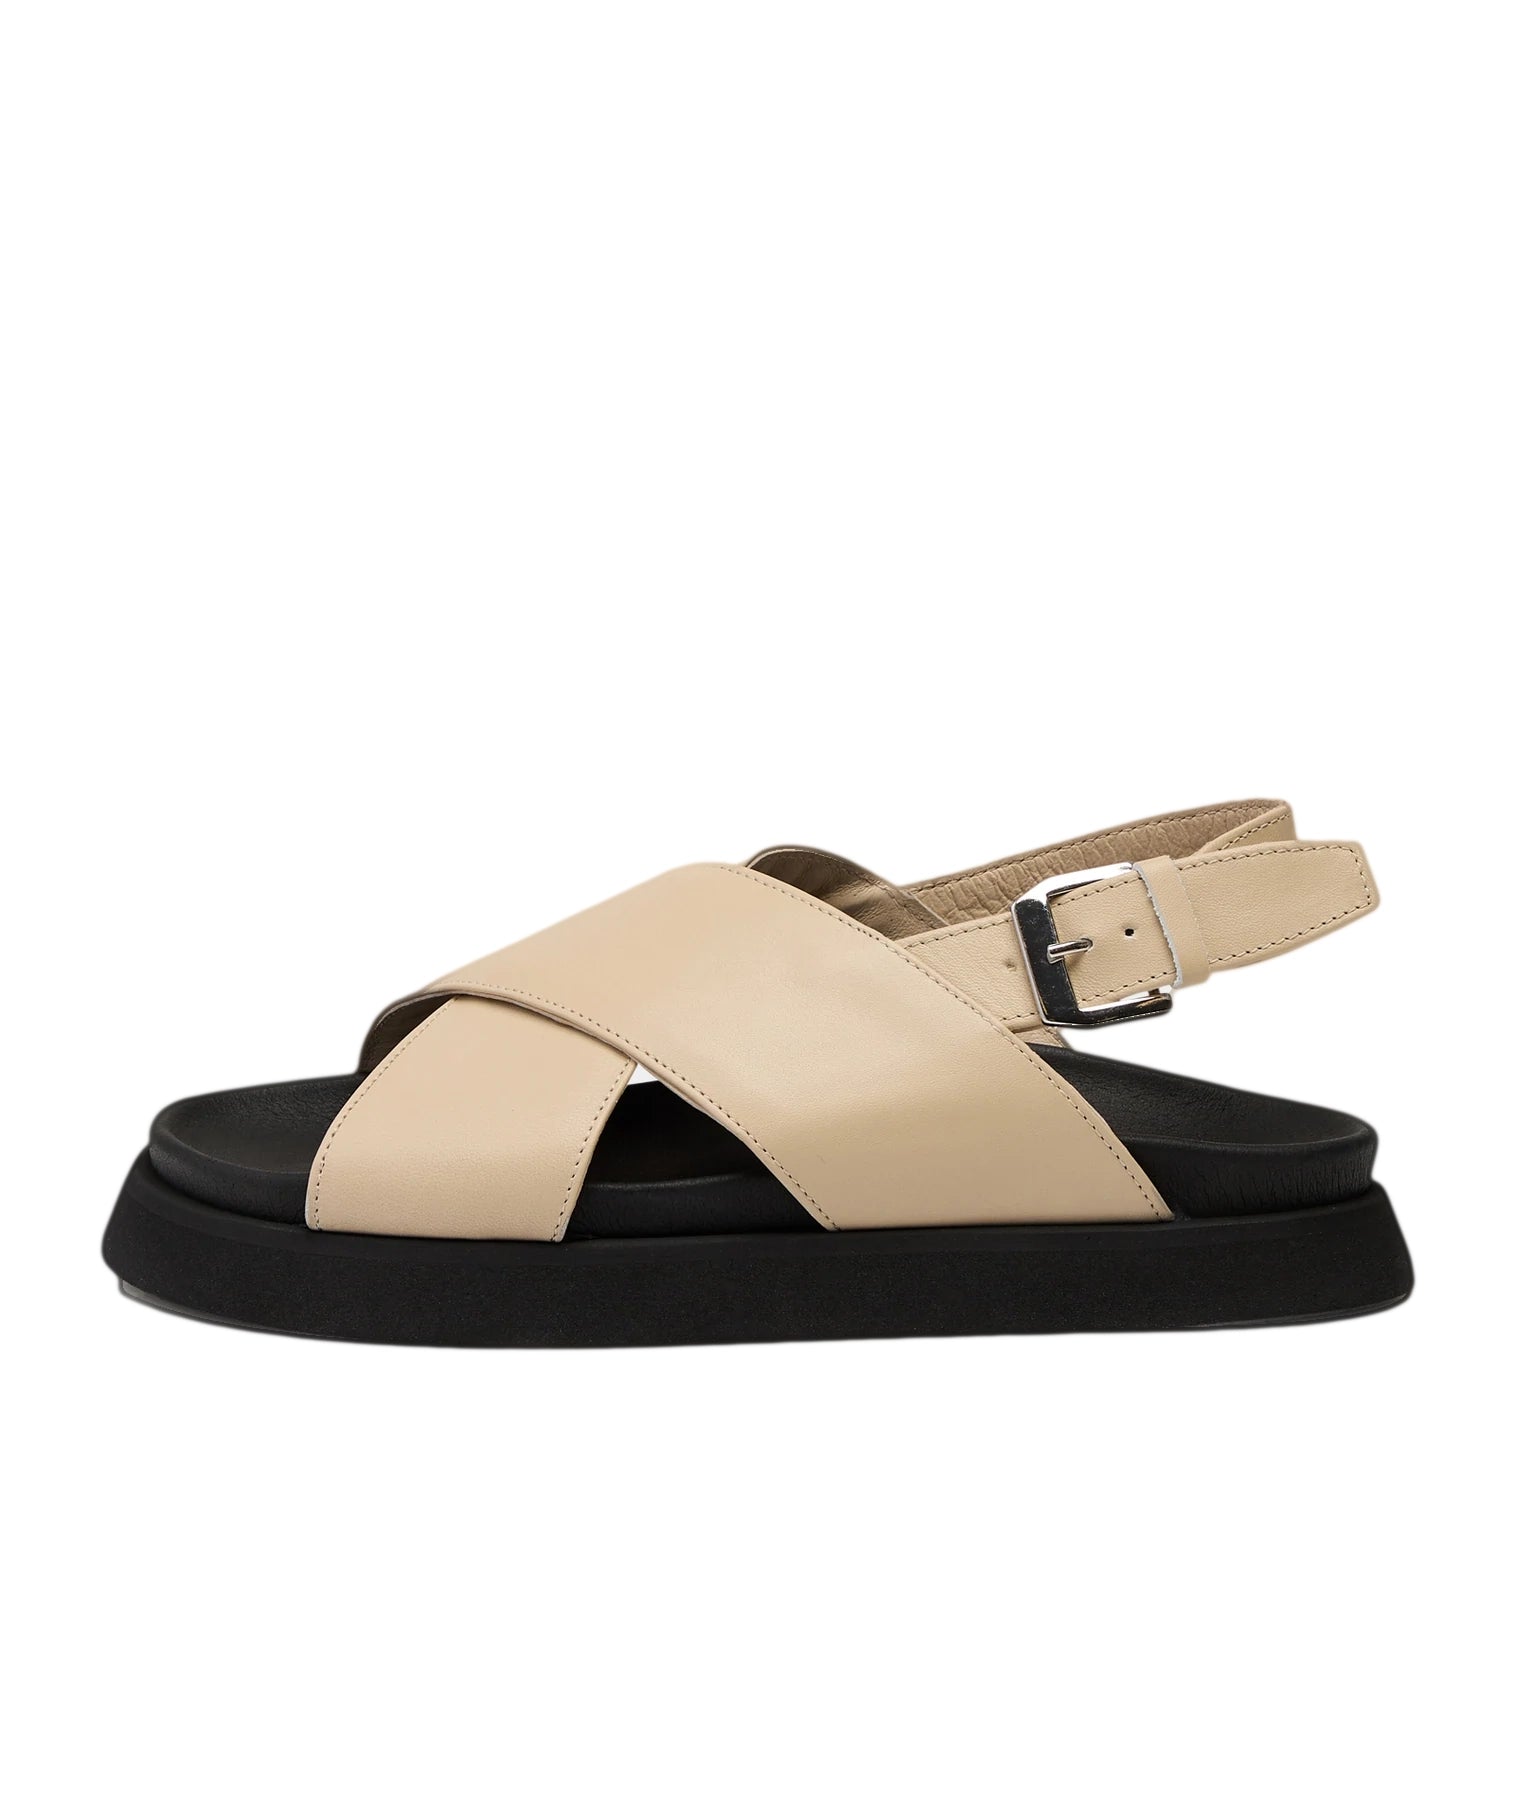 Yodi Sandals, off white leather